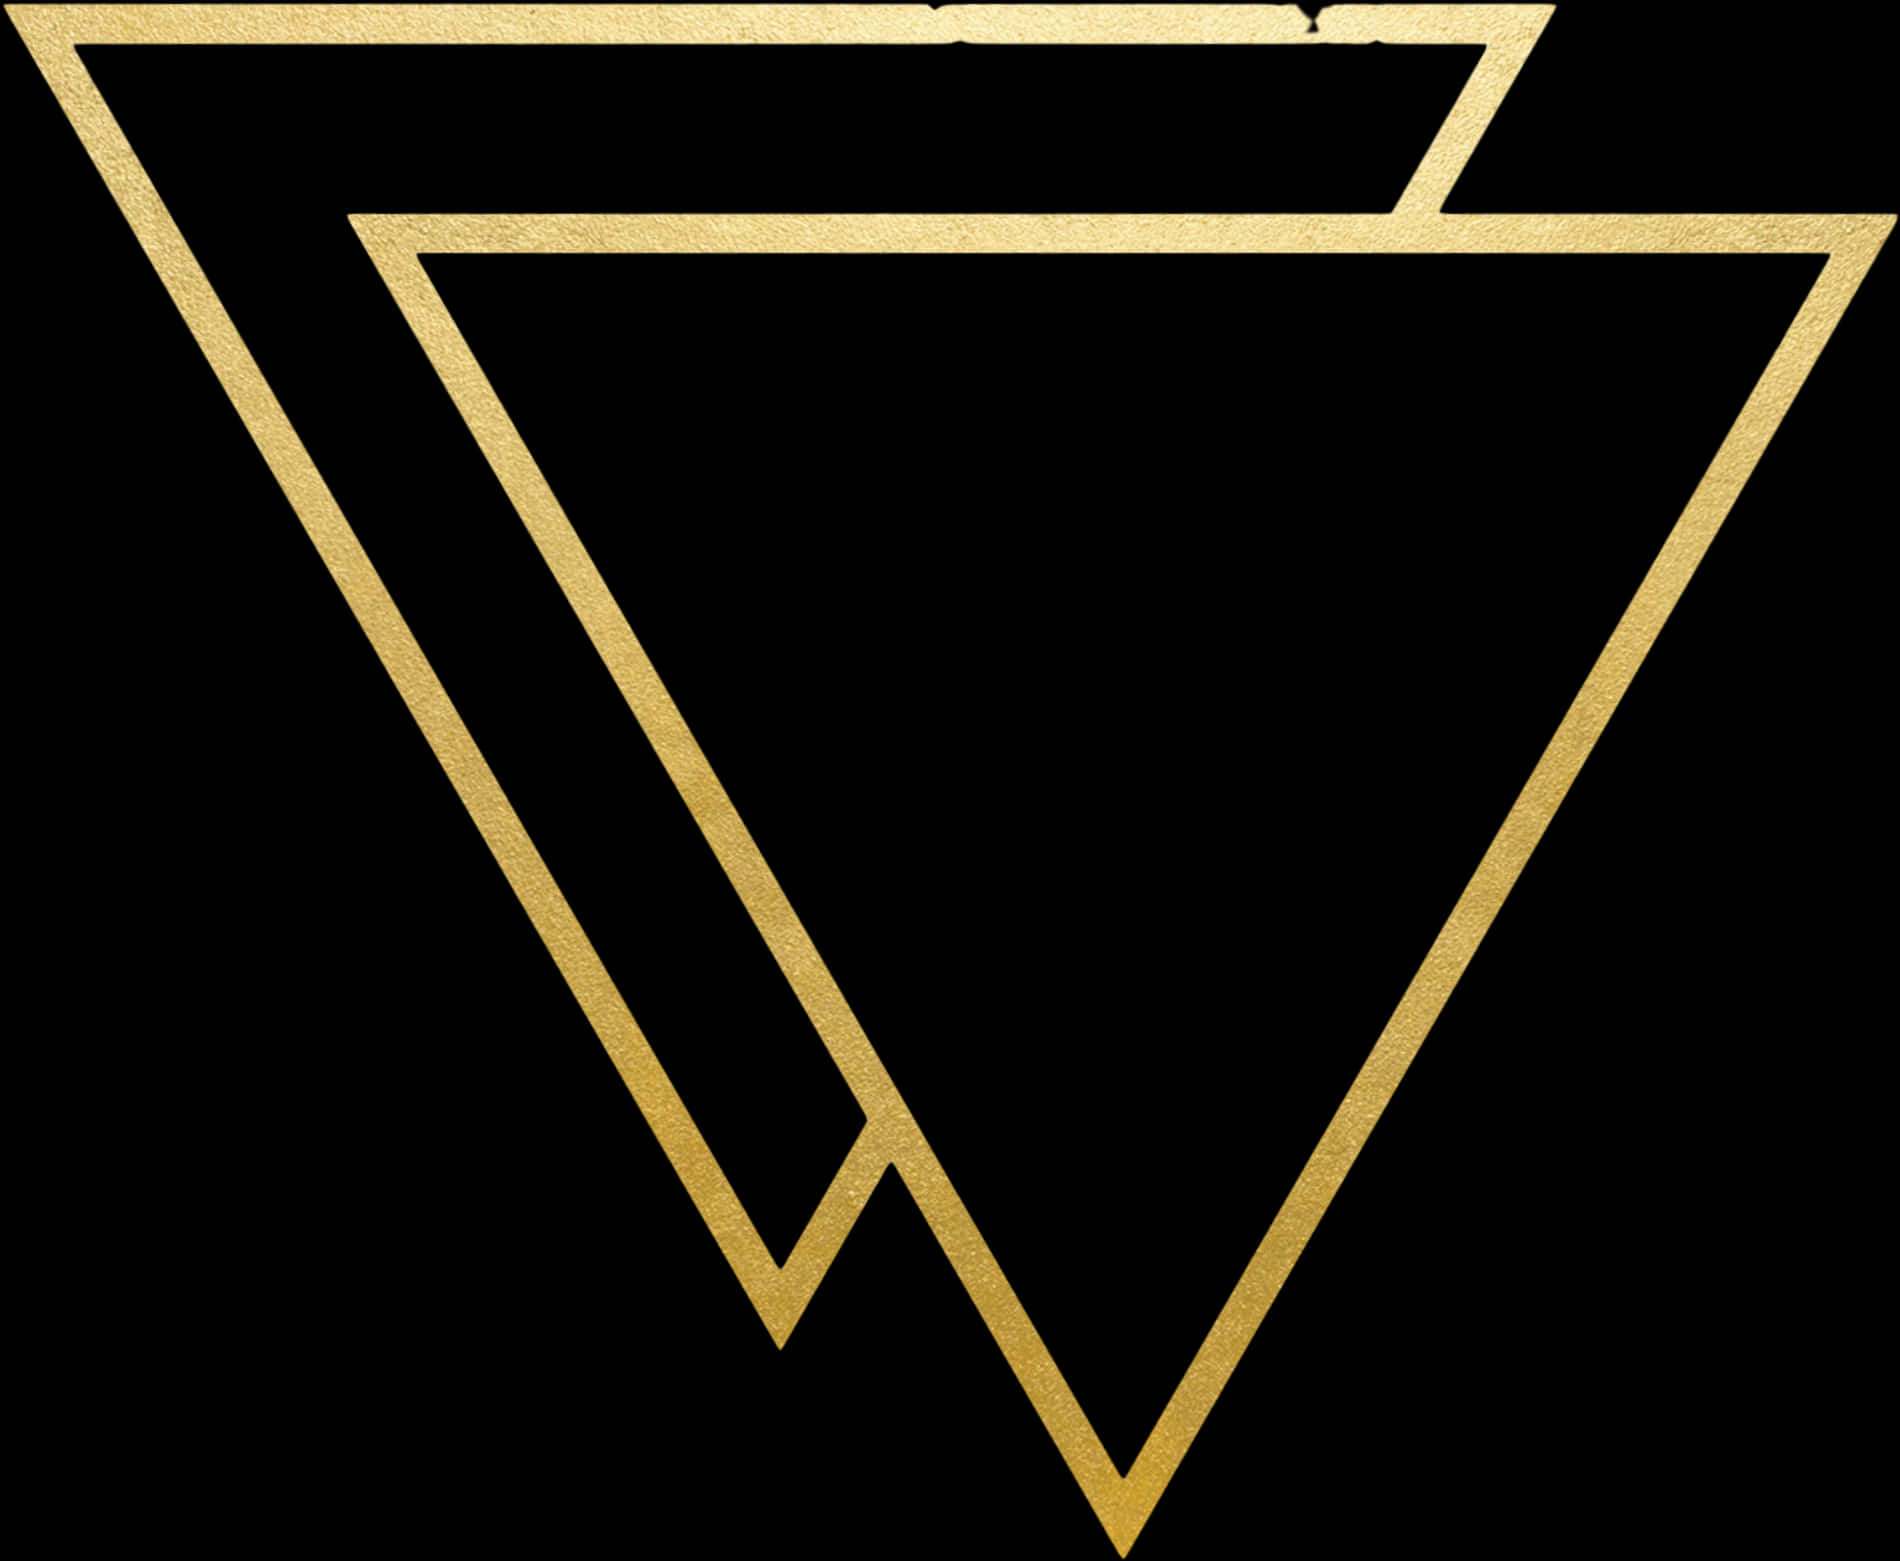 A Gold Triangle On A Black Background